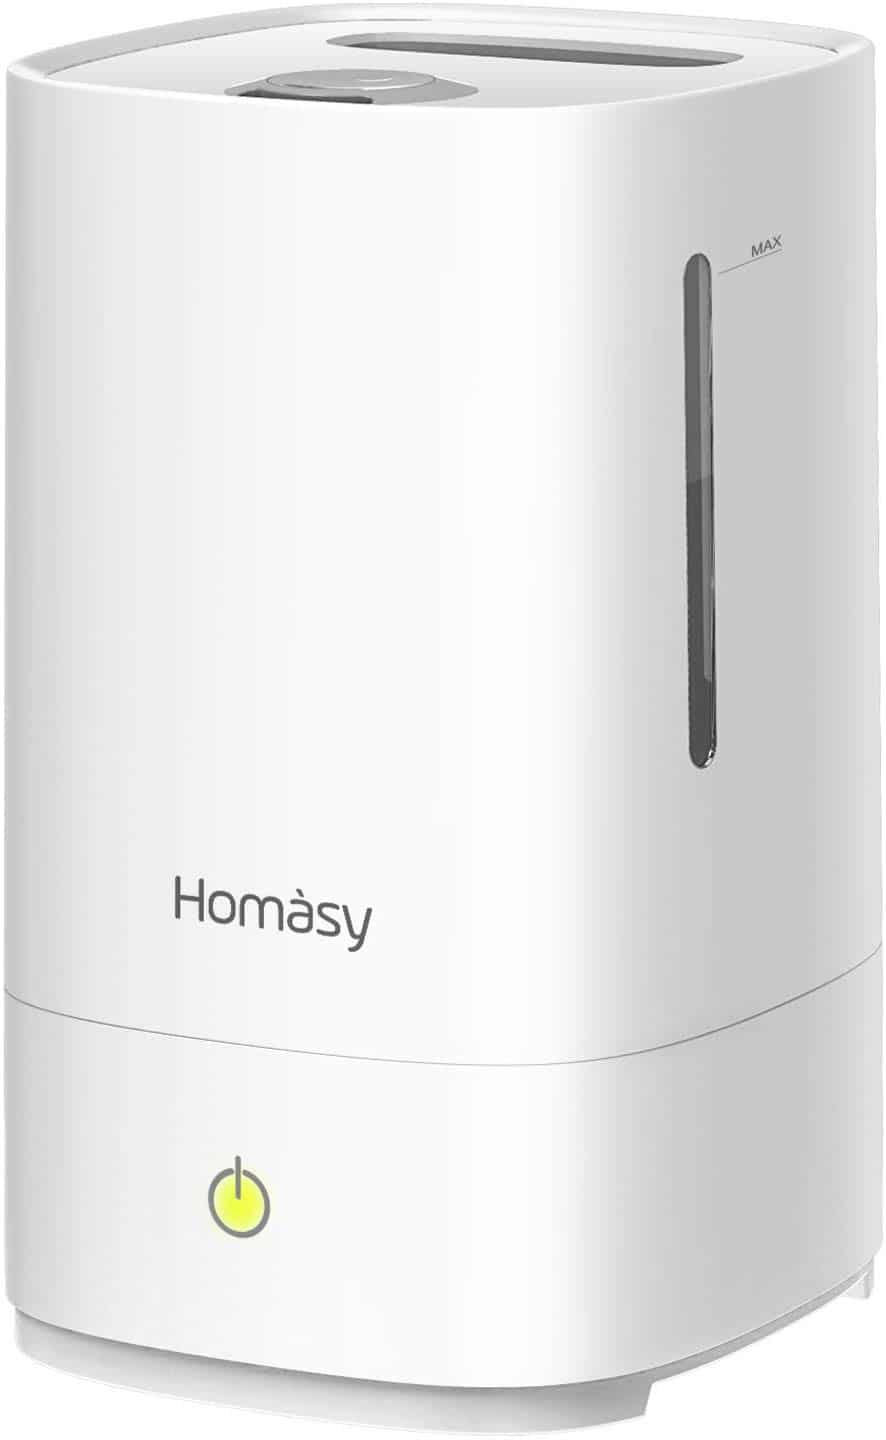 Homasy 4.5L Cool Mist Humidifier